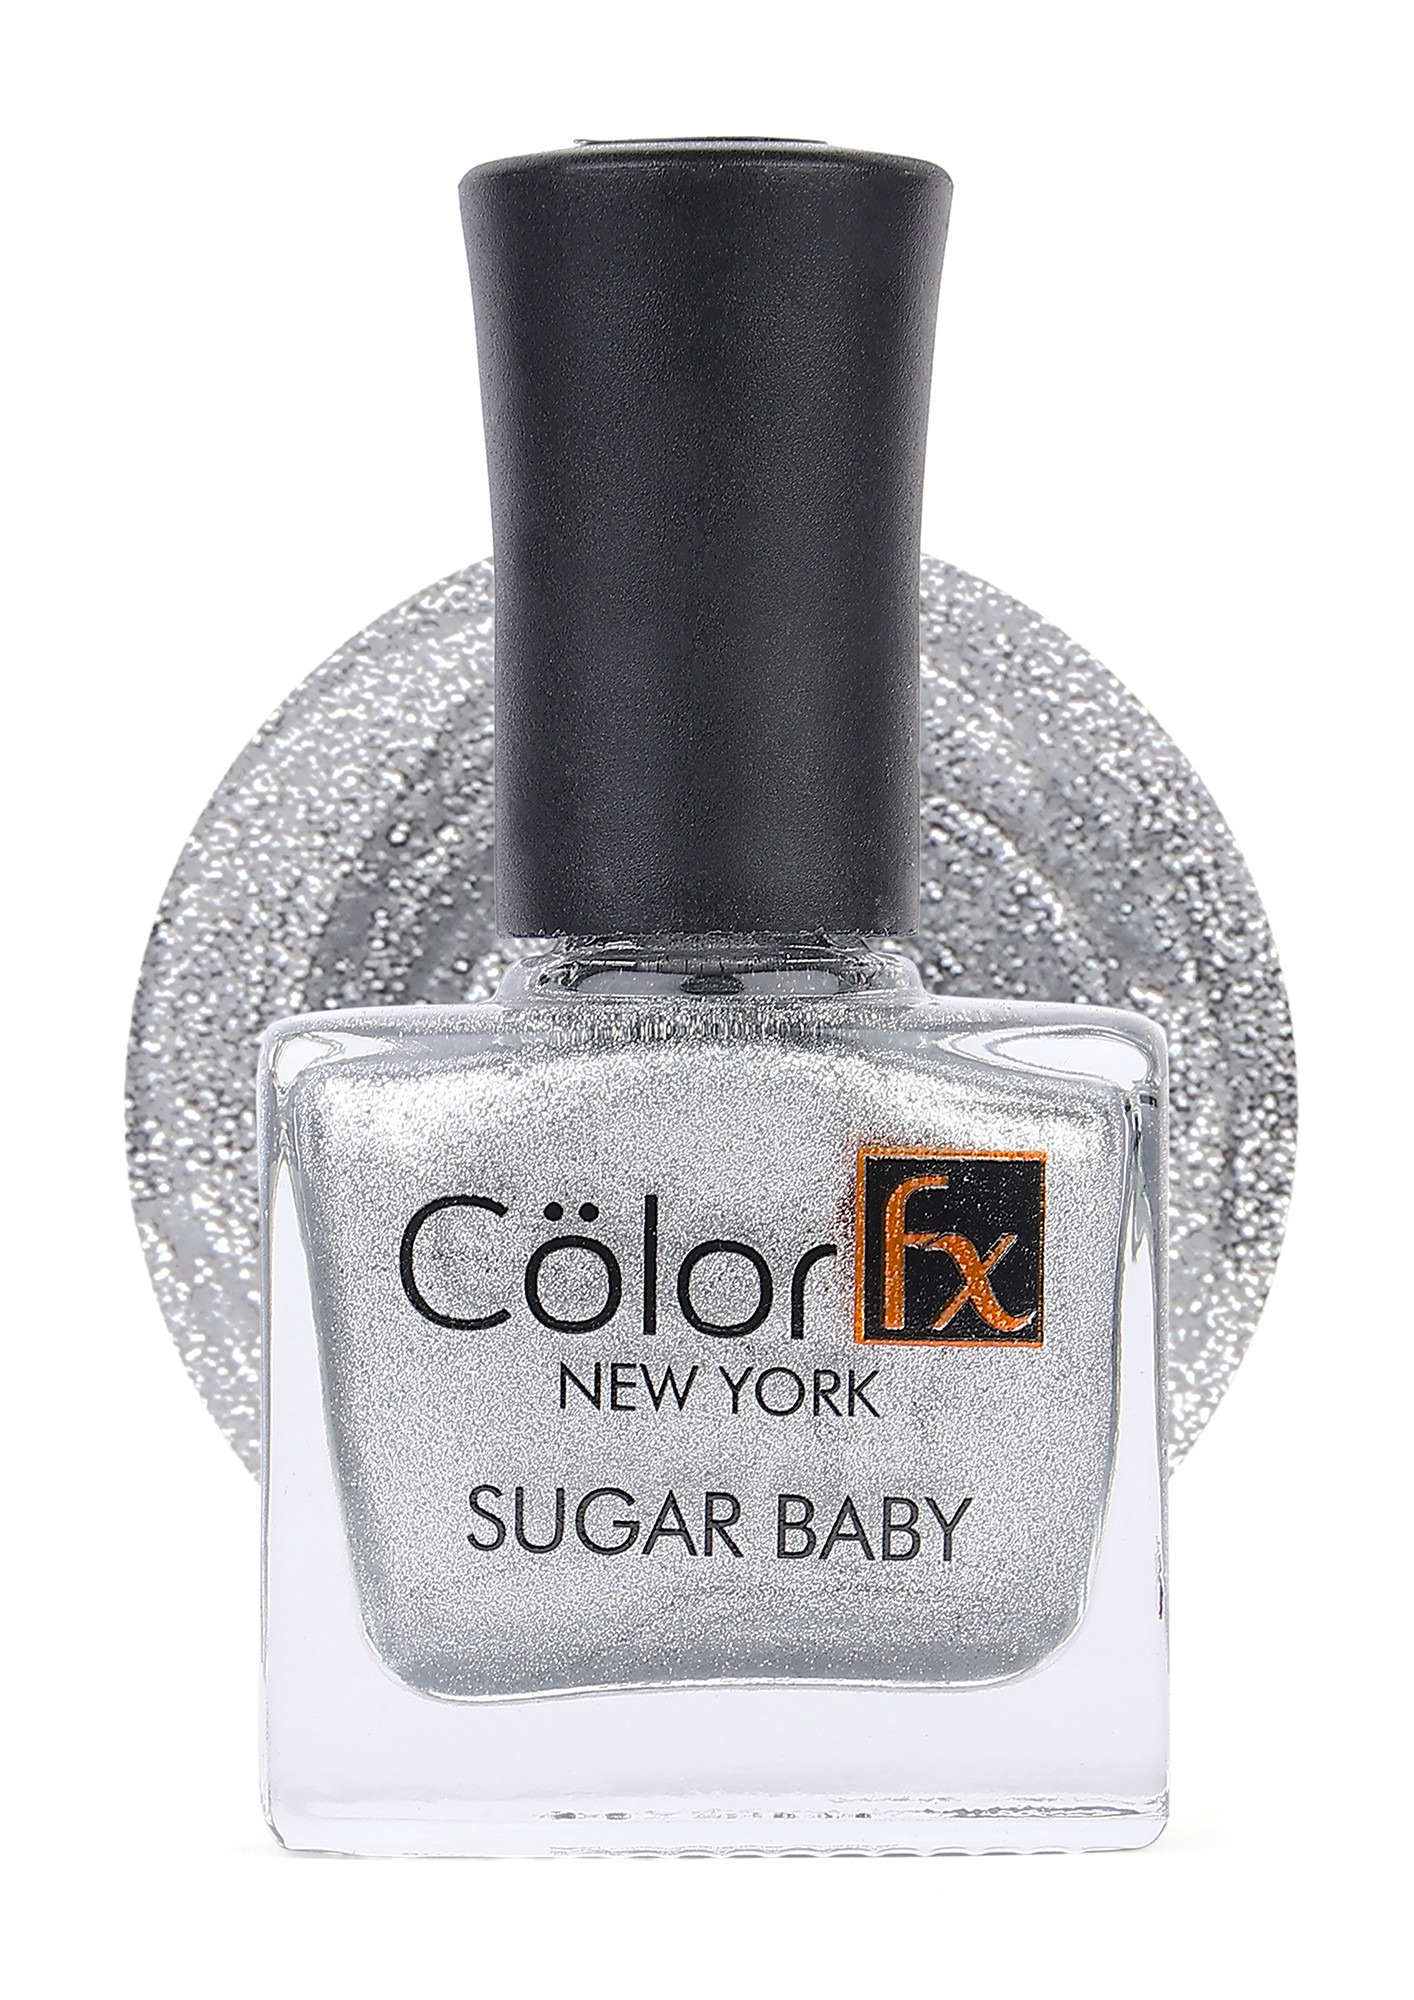 SNM Metallic Grey Nail Polish, Pack Size: 12ml, for Personal at Rs 22/piece  in Ludhiana